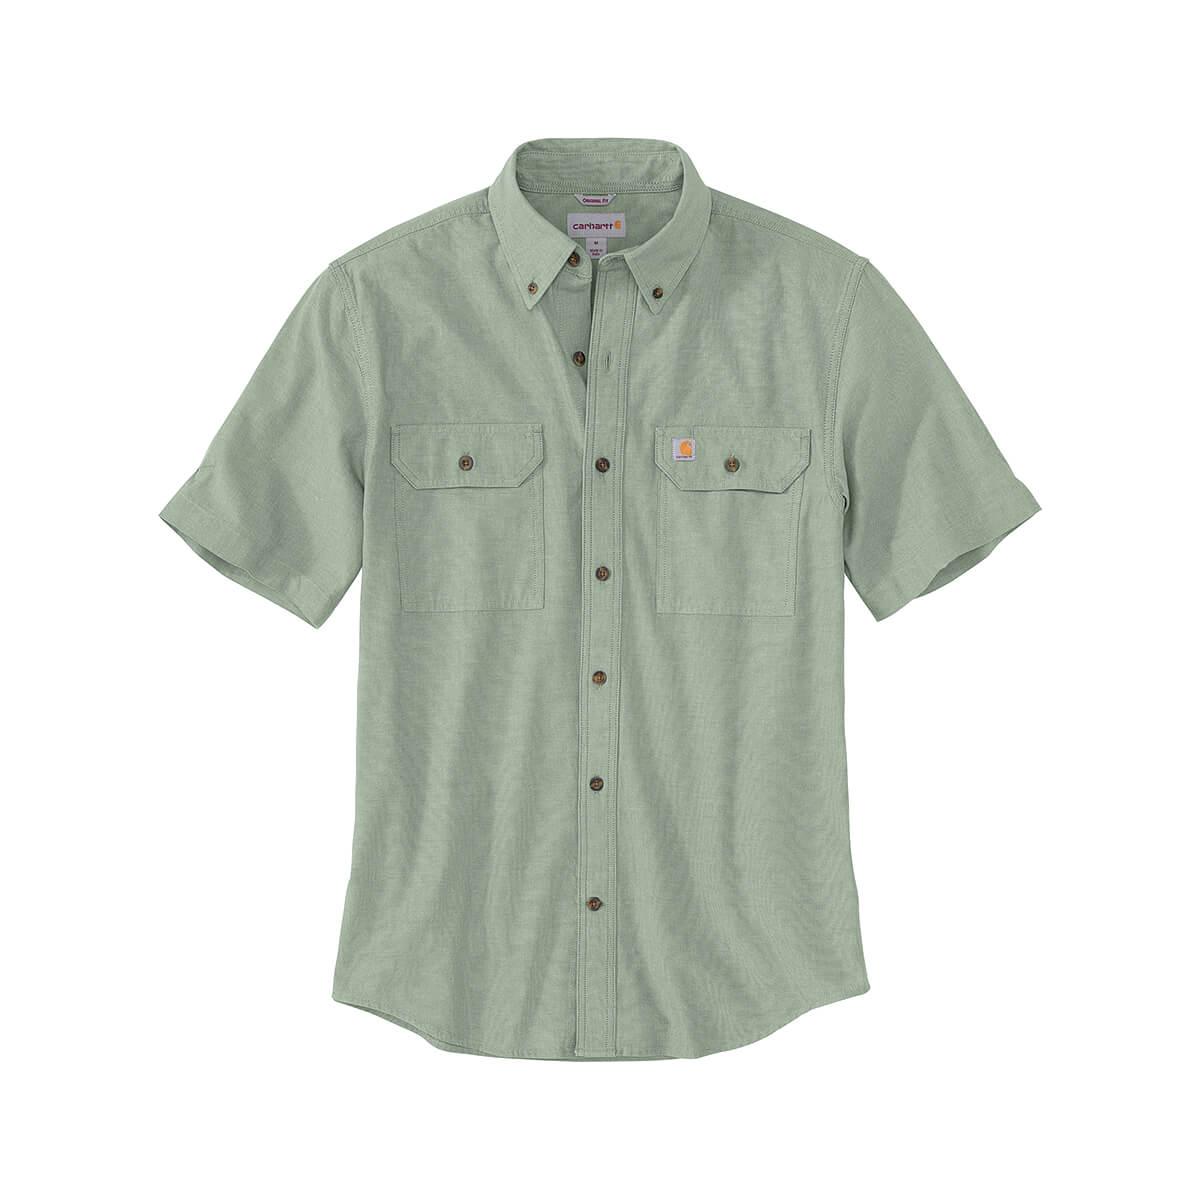  Men's Loose Fit Chambray Solid Short Sleeve Button Up Shirt